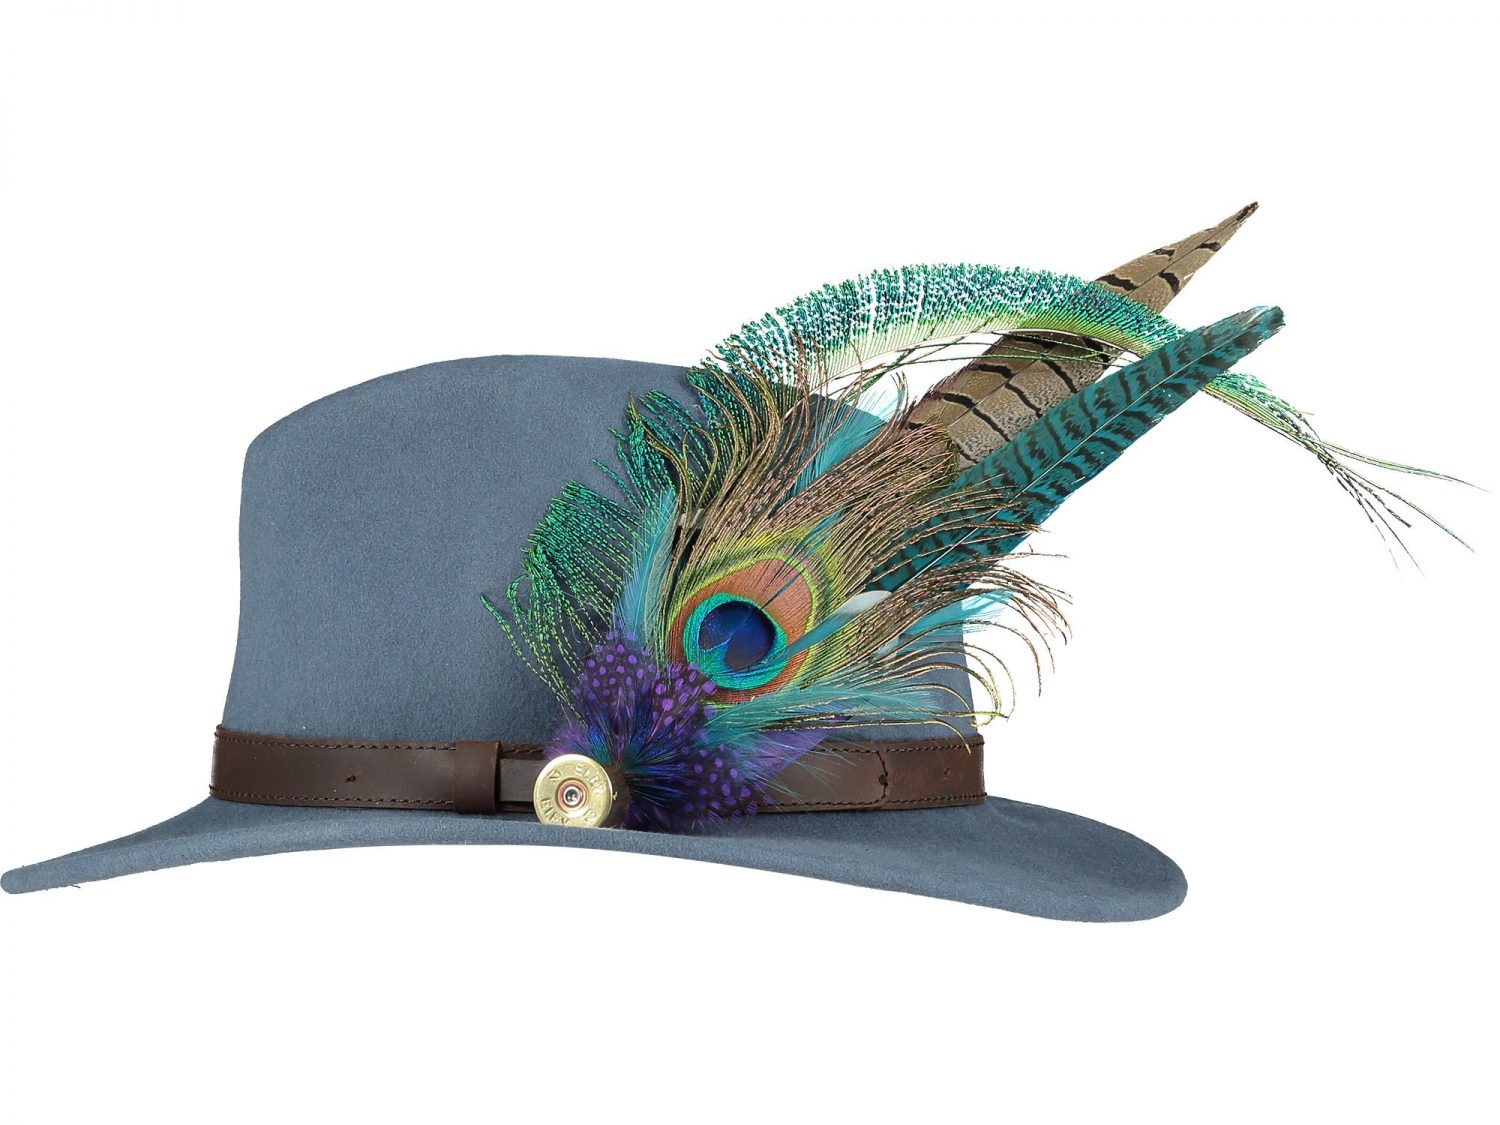 Large Peacock Feather Pin and Hat